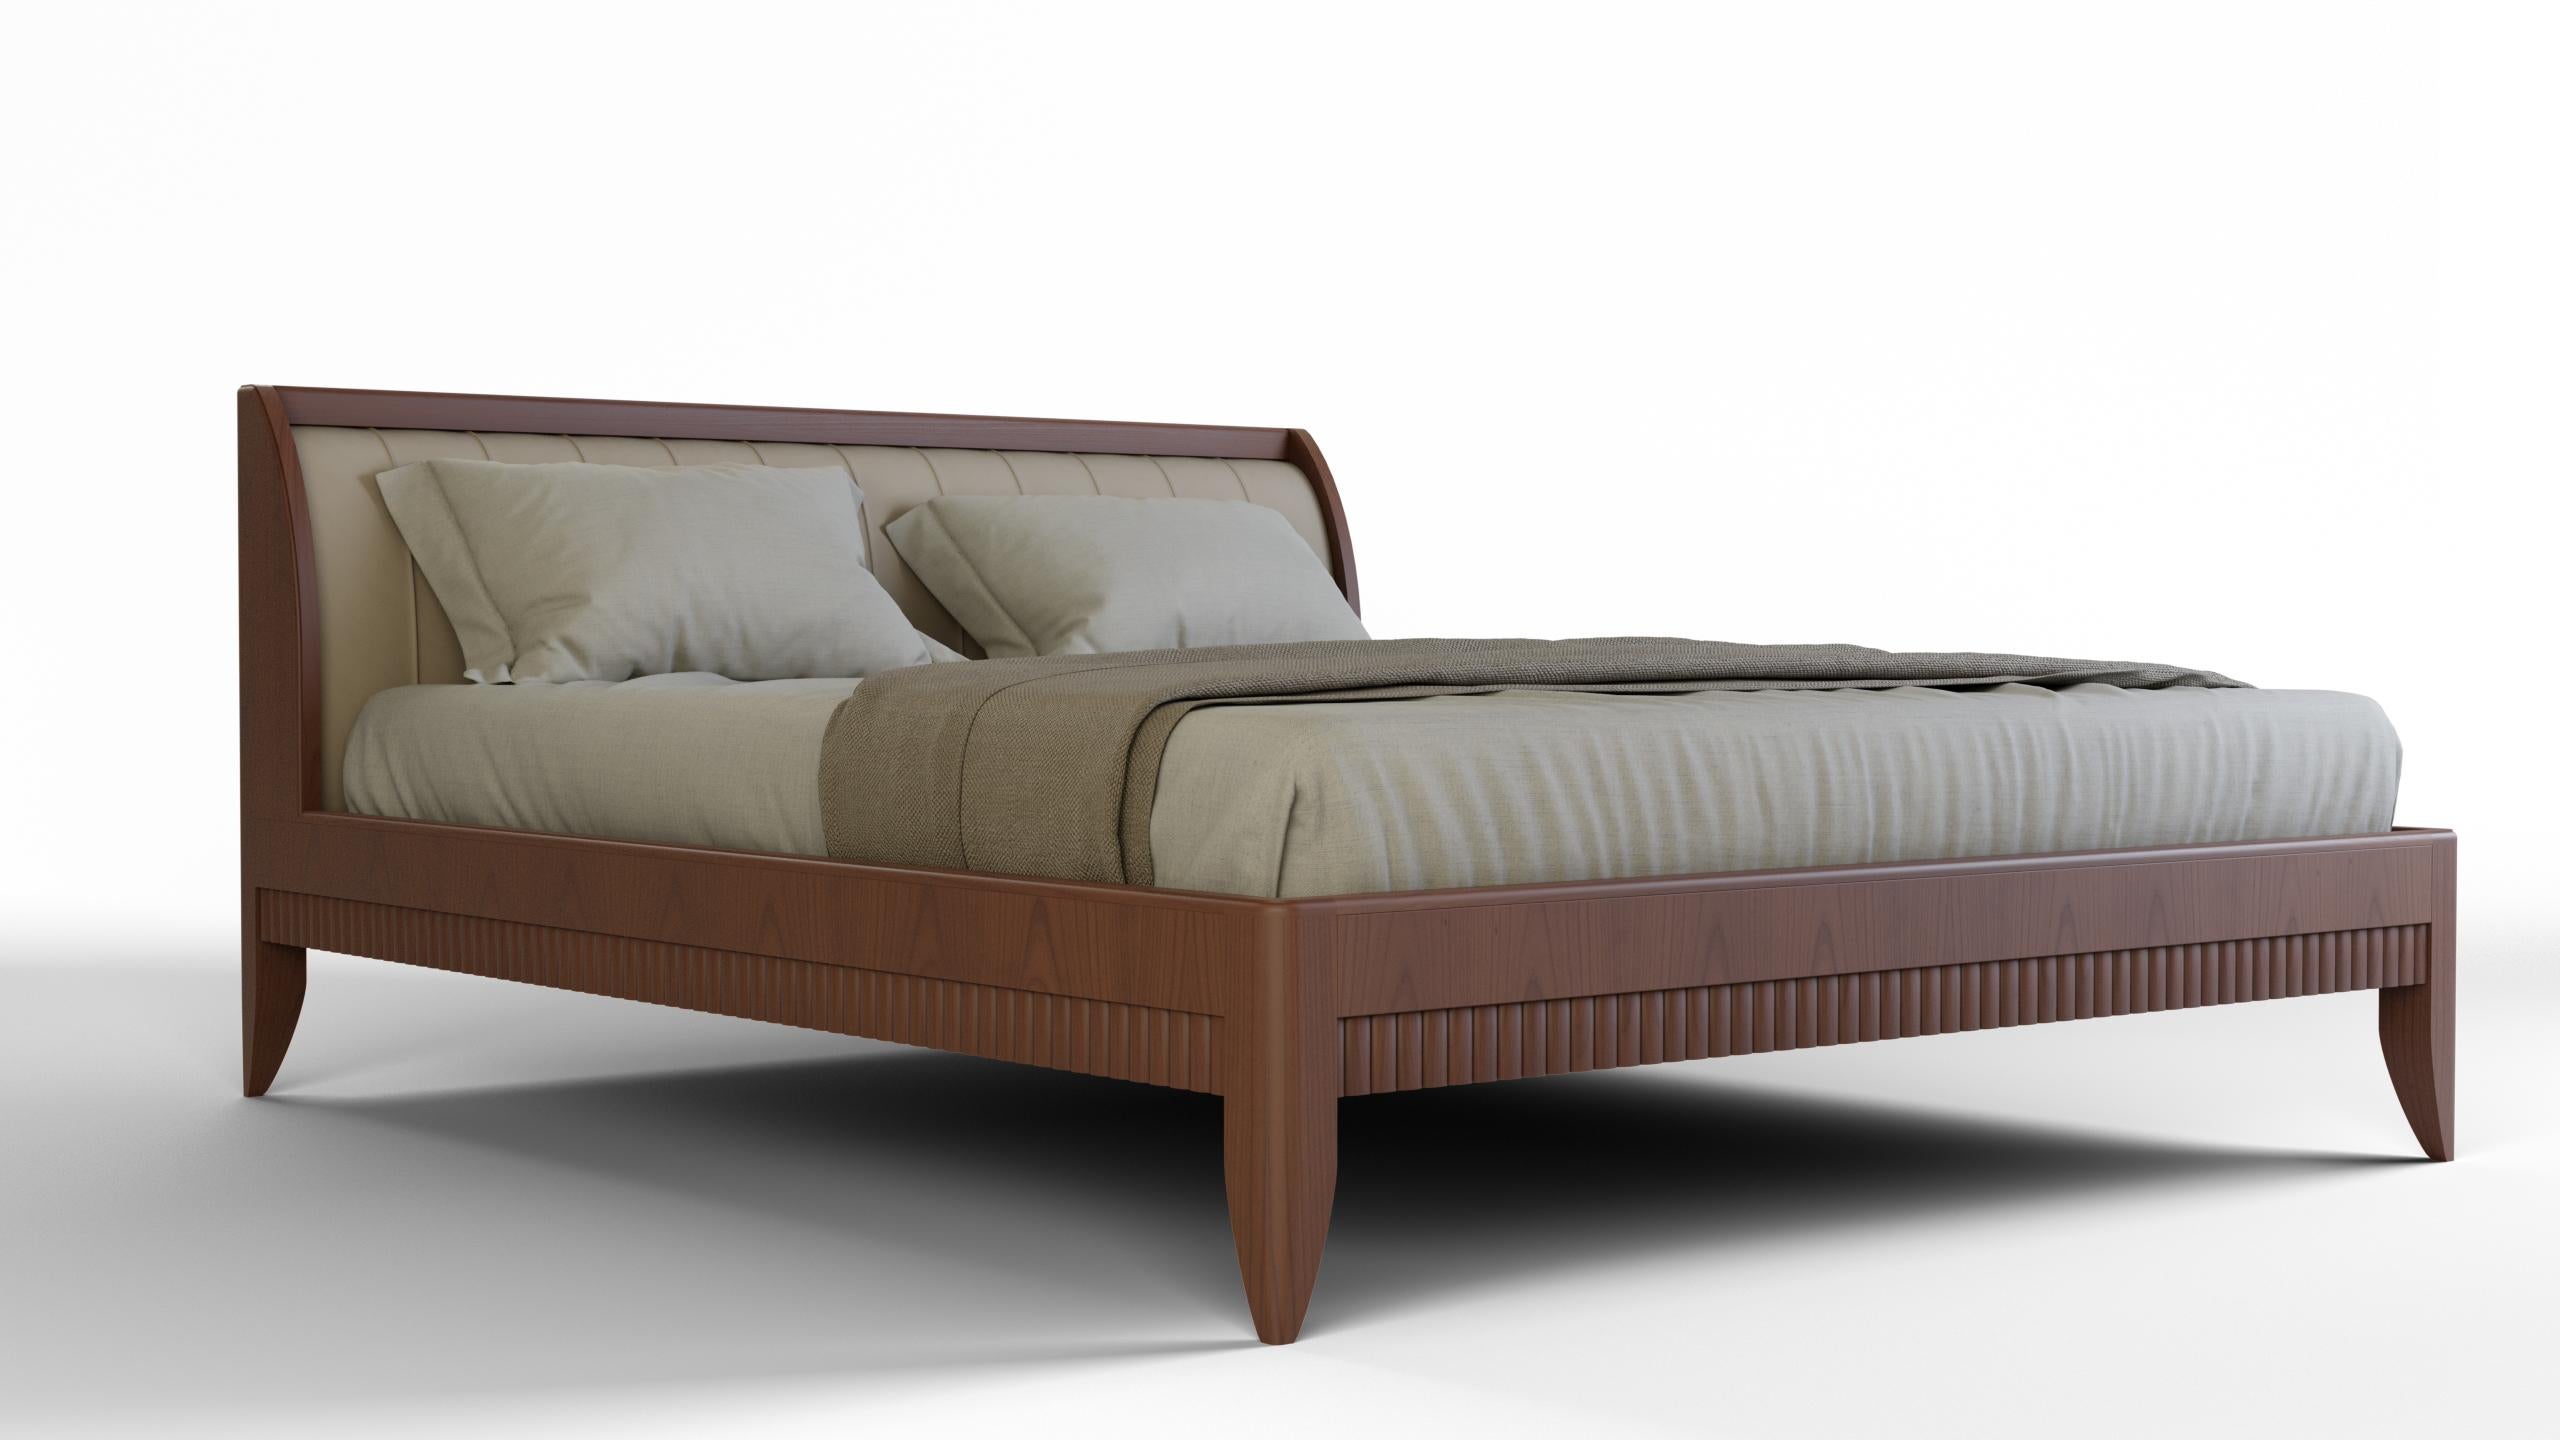 bed made of cherry wood with leather or fabric upholstered headboard.
Available in different mattress sizes:
Headboard upholstered with leather, fabric, velvet or COM
Wooden slats mattress support included.

Made in Italy by Morelato.